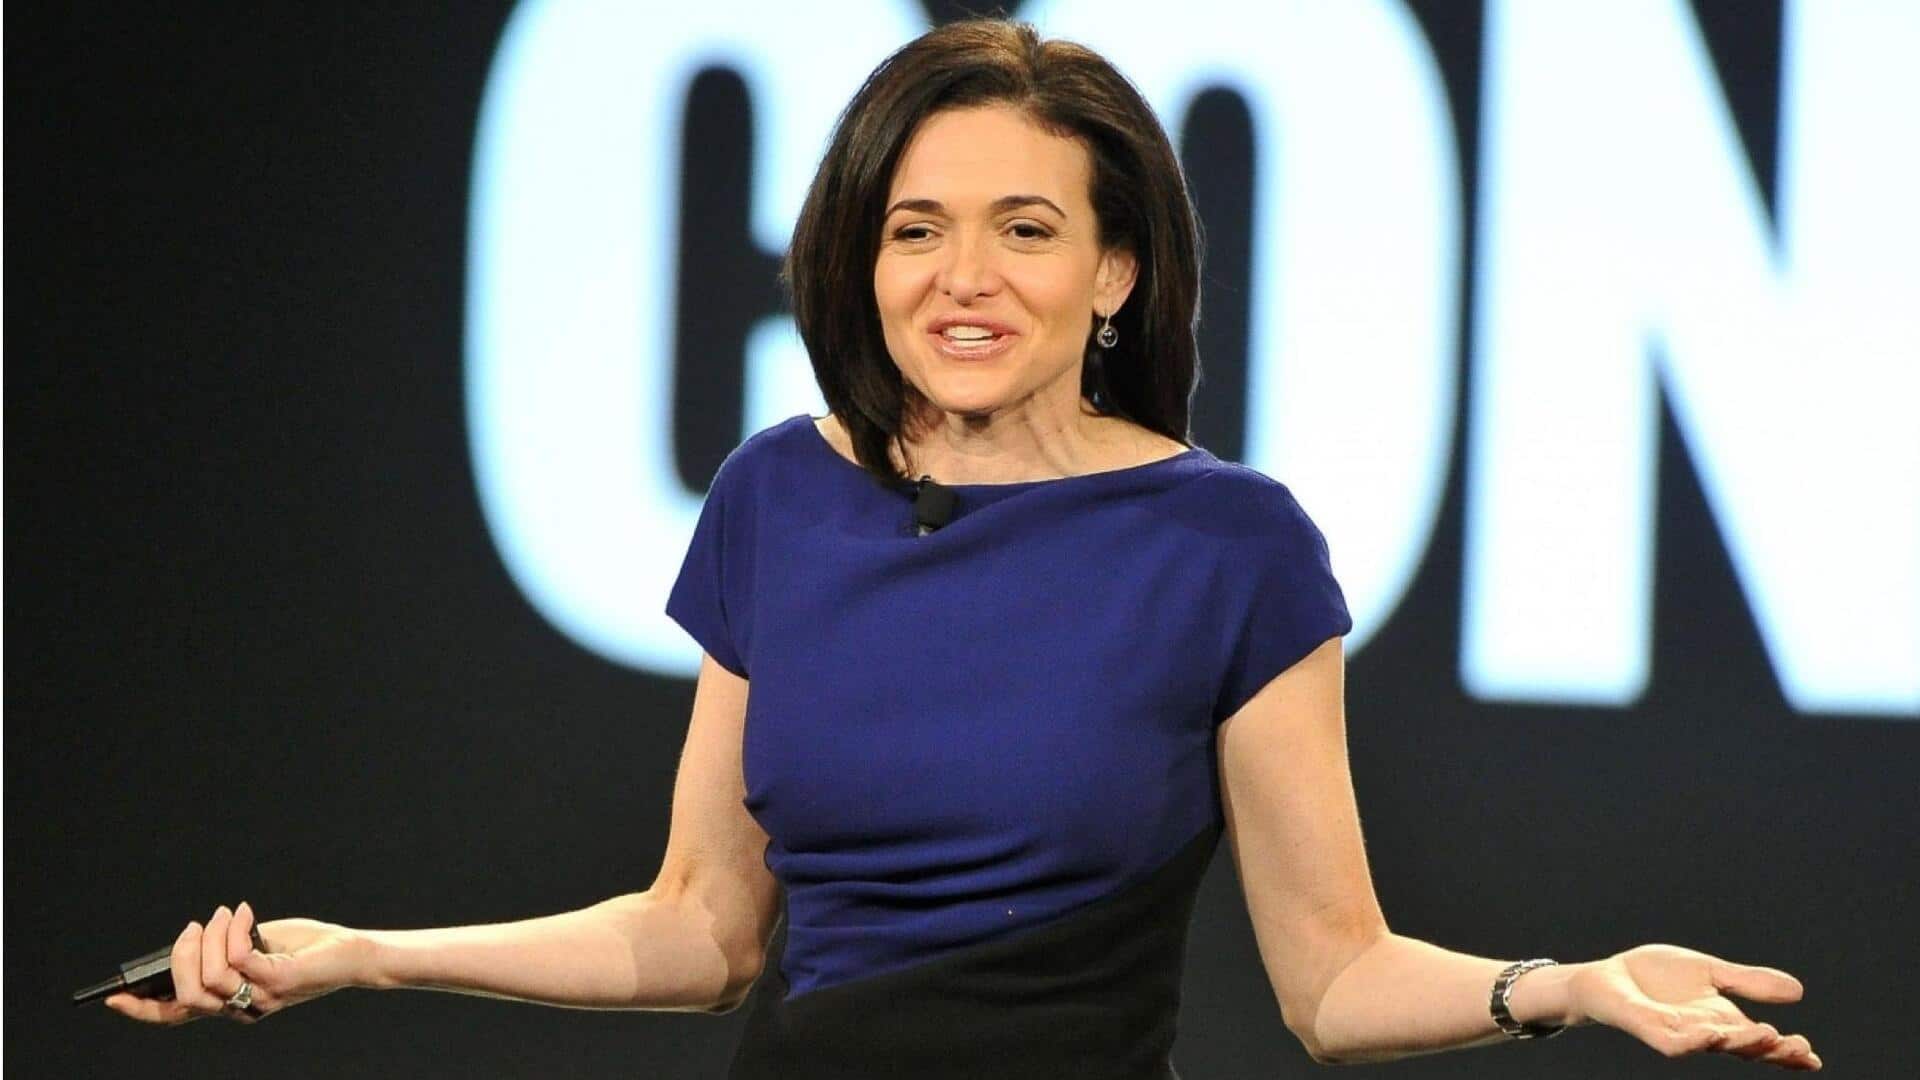 Sheryl Sandberg steps down from Meta's board after 12 years